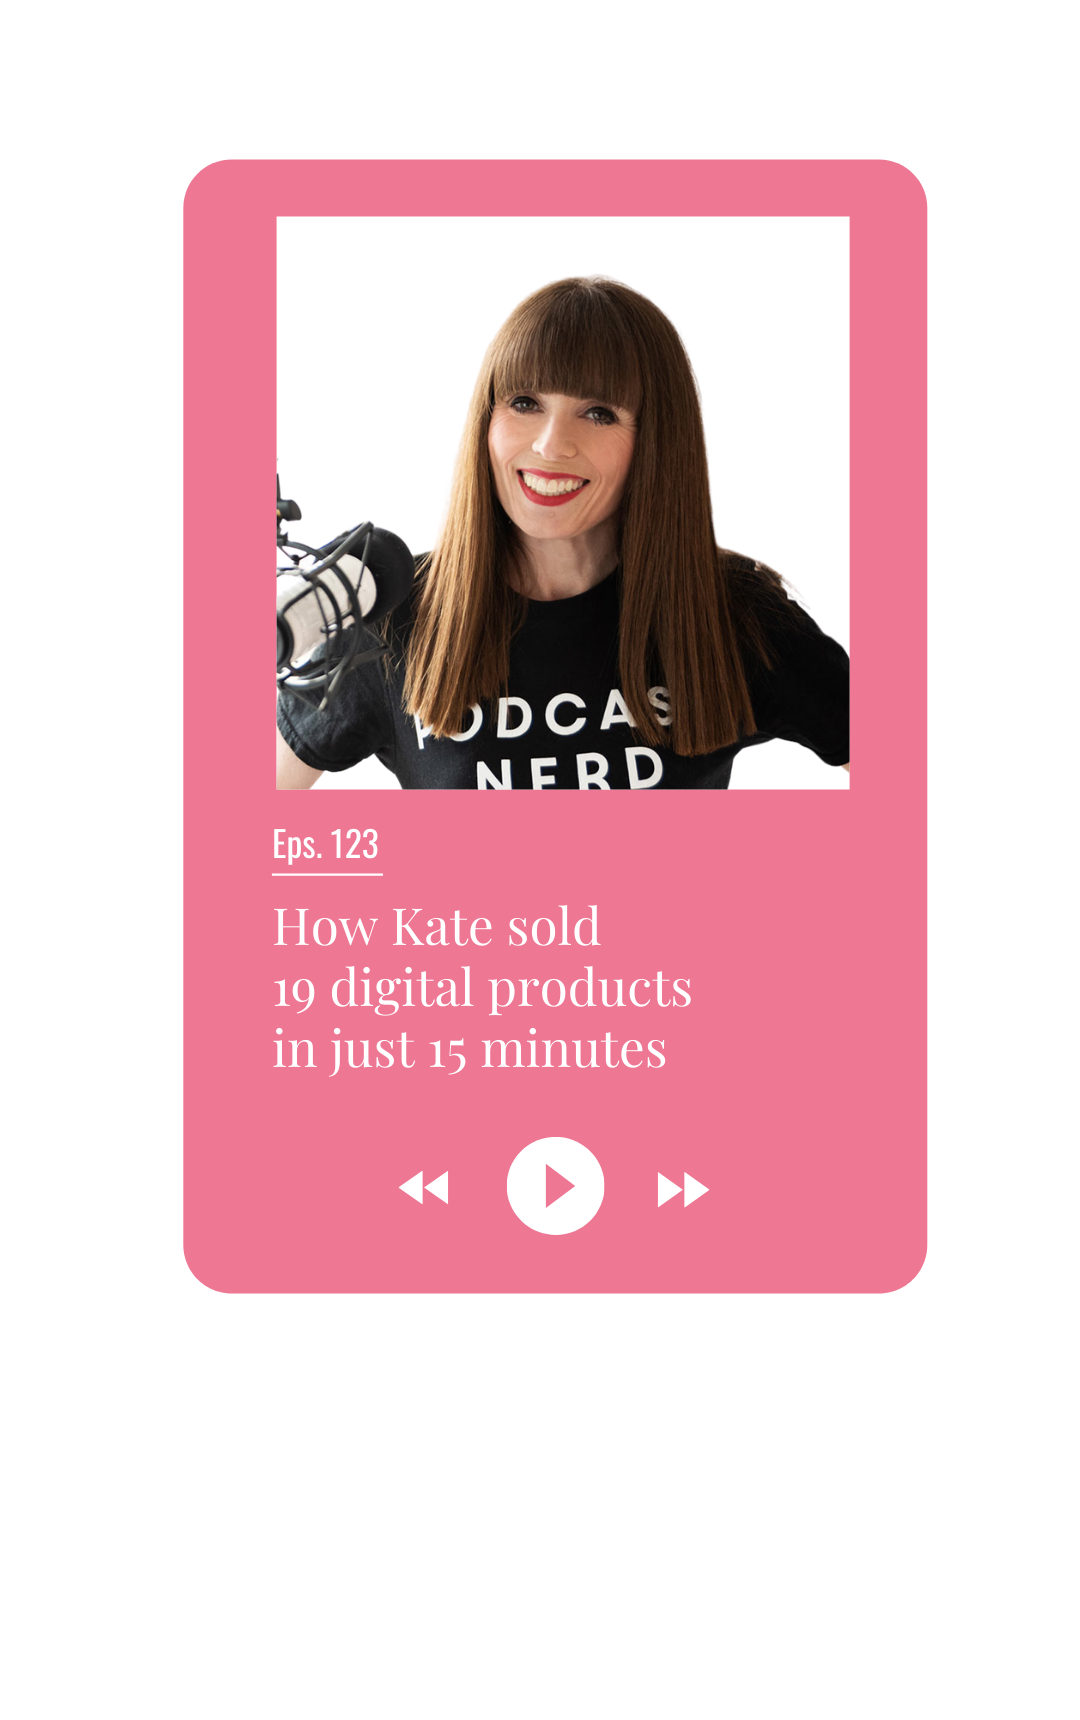 How Kate sold 19 digital products in just 15 minutes